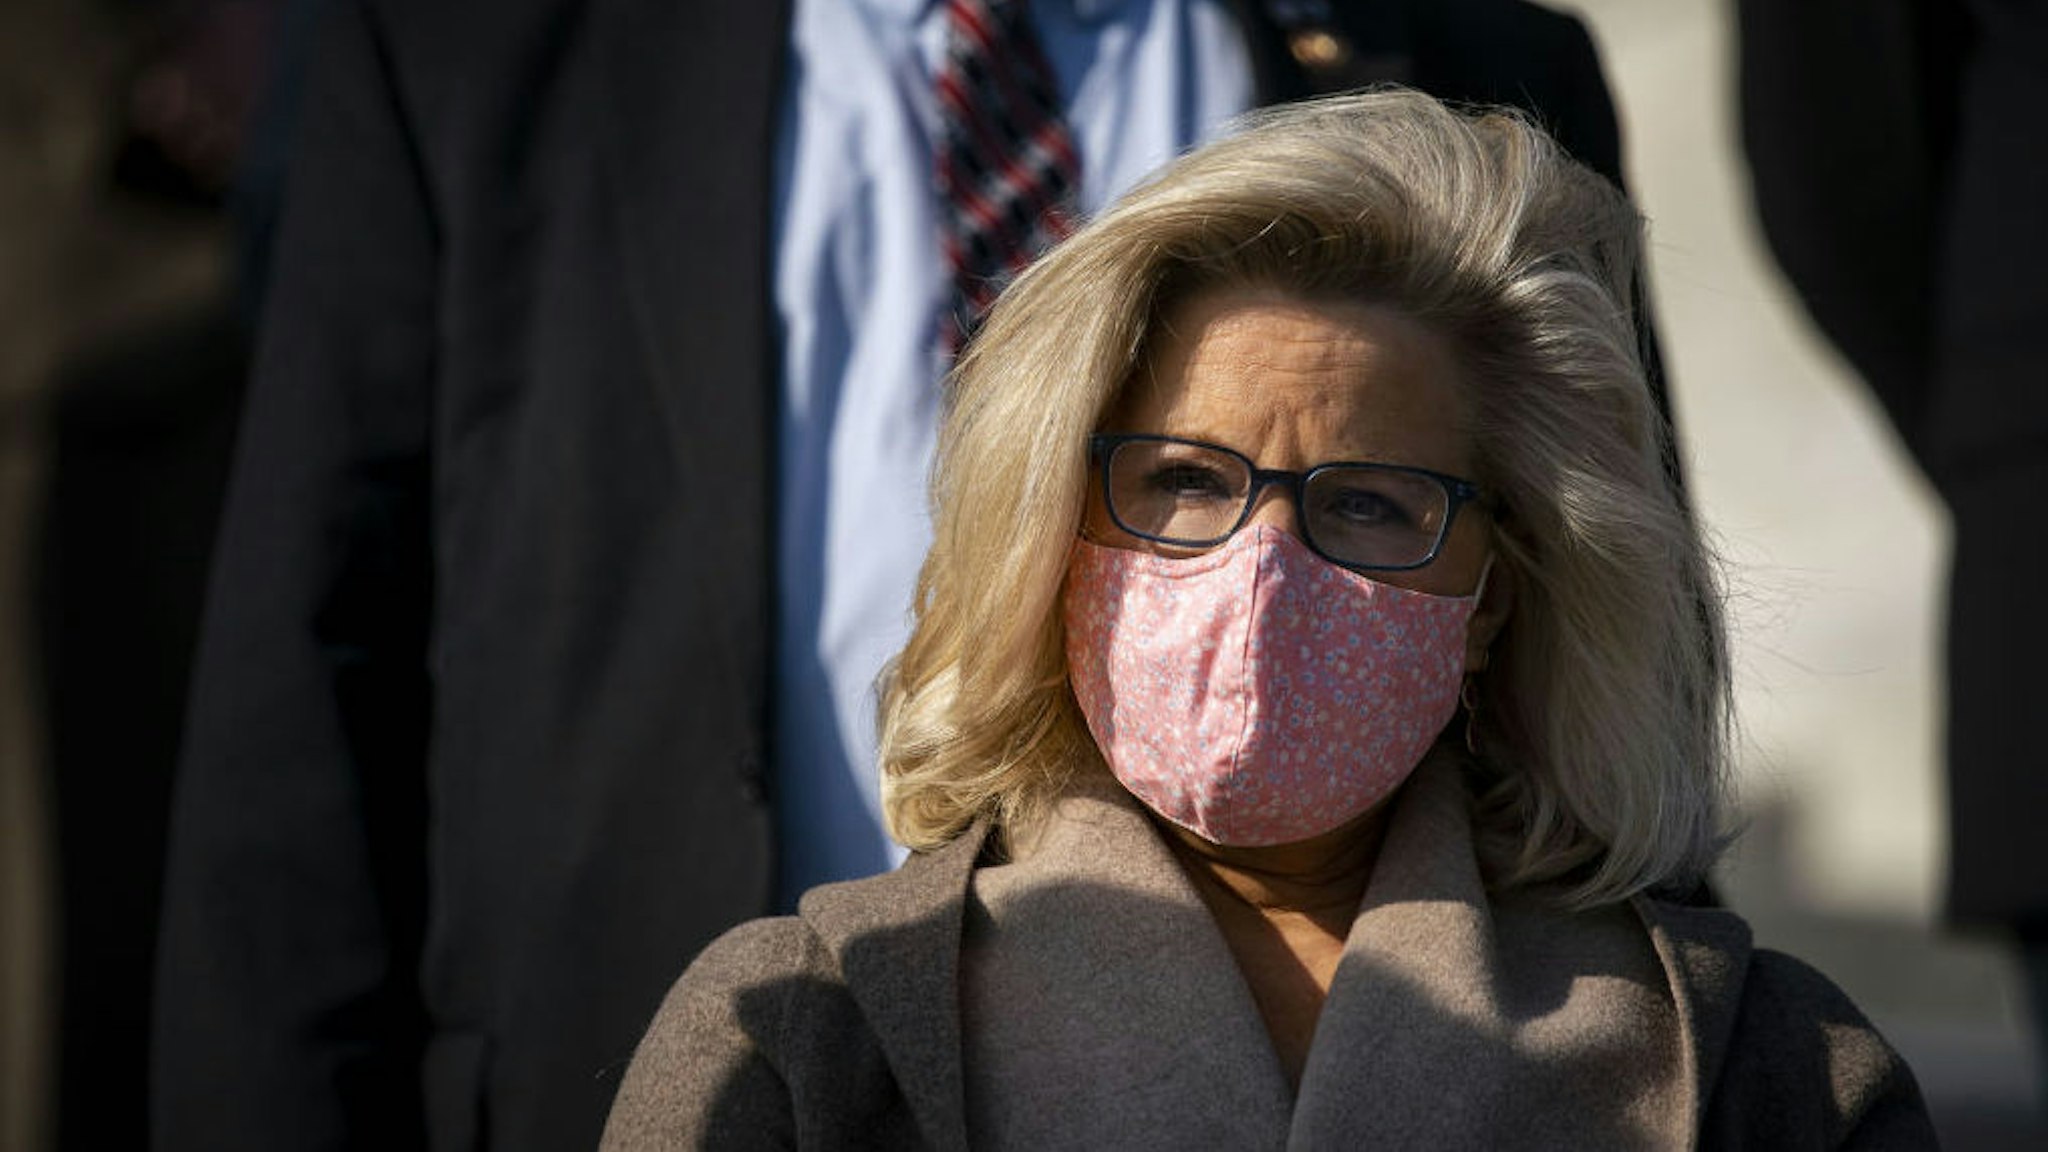 Representative Liz Cheney, a Republican from Wyoming, attends a news conference outside the U.S. Capitol in Washington, D.C., U.S., on Thursday, Dec. 10, 2020. Senate Majority Leader McConnell and House Speaker Pelosi have given no sign yet that they’re ready to directly engage in negotiations to sort through competing pandemic relief proposals -- a step that many lawmakers say will be necessary to complete a deal this month.